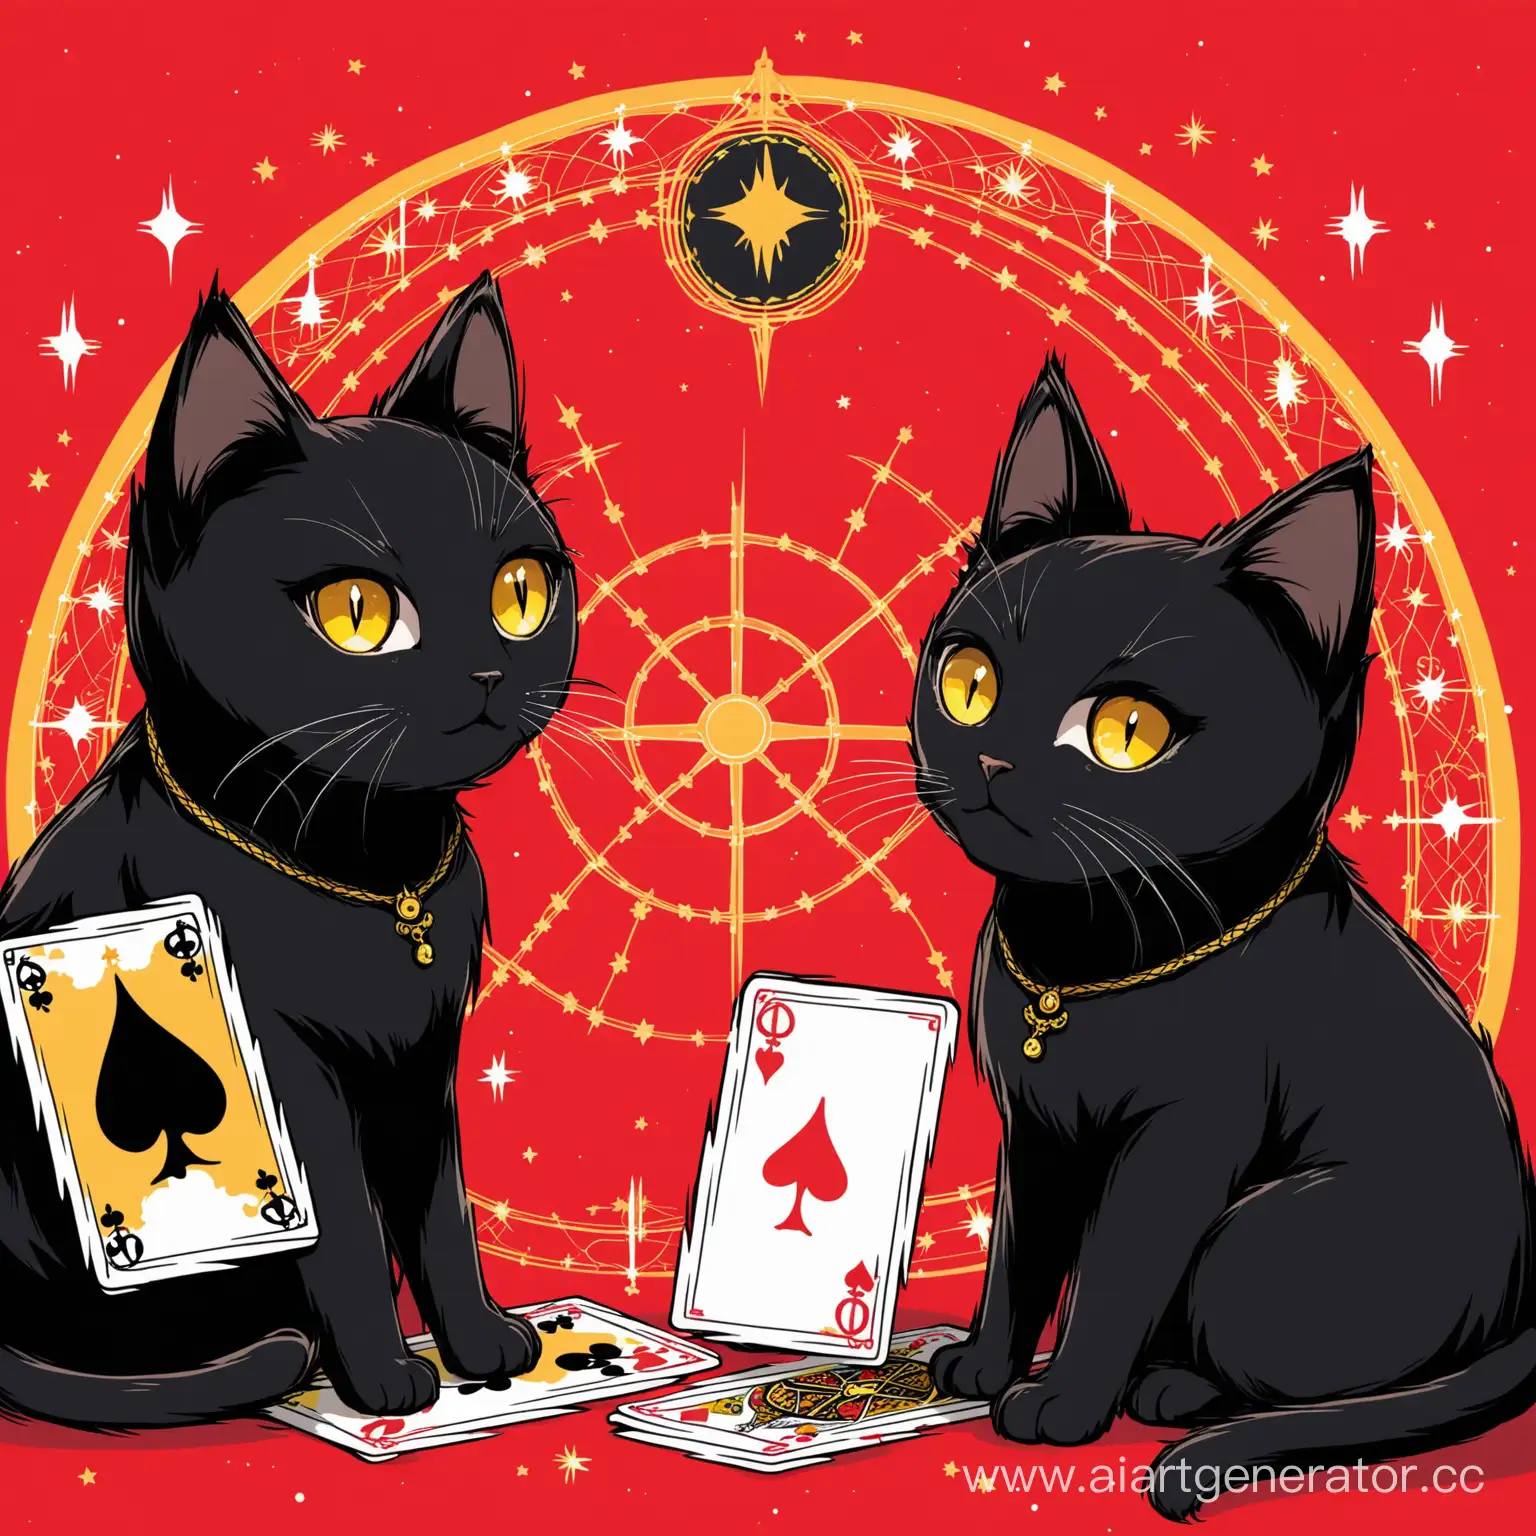 Mystical-Black-Cats-Surrounded-by-Tarot-Cards-on-Red-Background